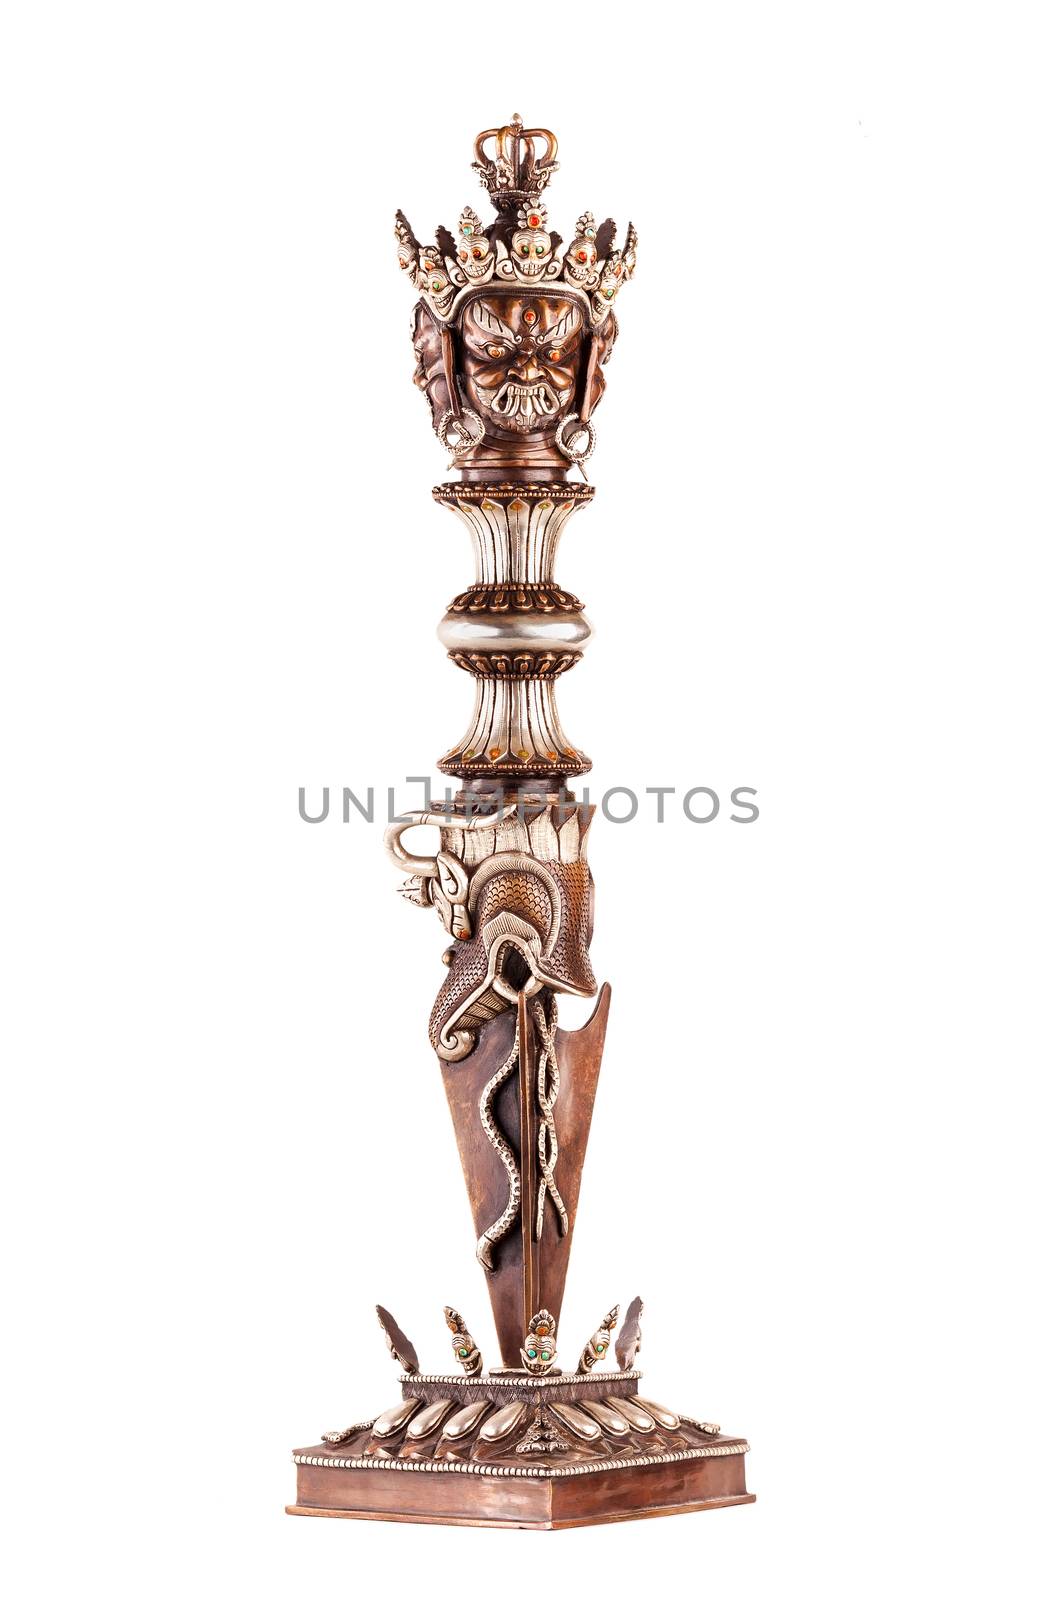 Ritual blade of Phurba which is used in Tantric Buddhism of destruction of all concepts and attachment to an ego. Isolated on a white background.
              